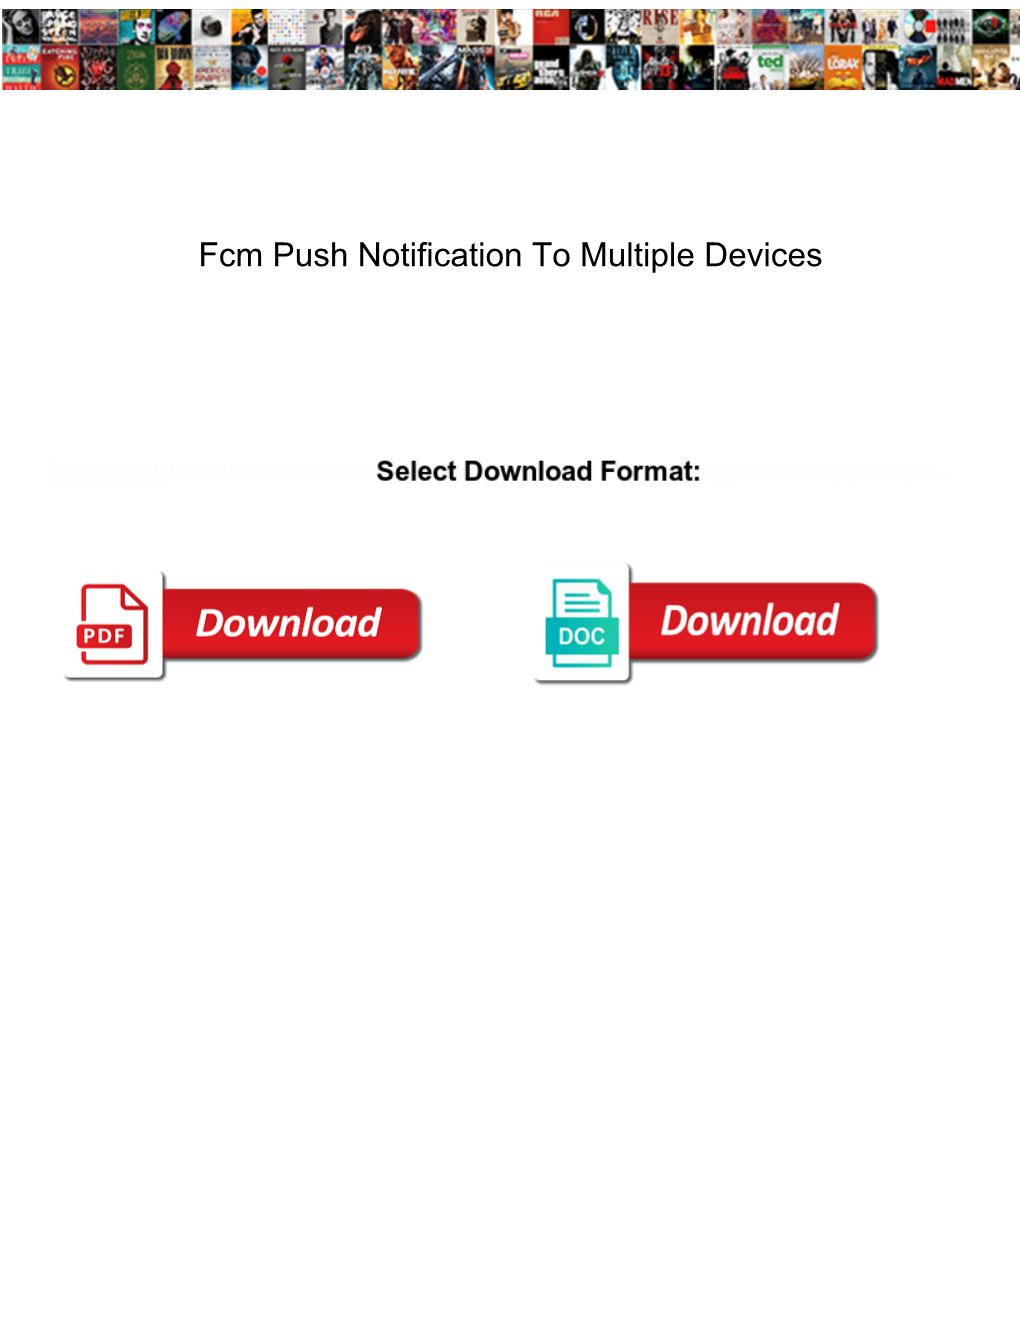 Fcm Push Notification to Multiple Devices